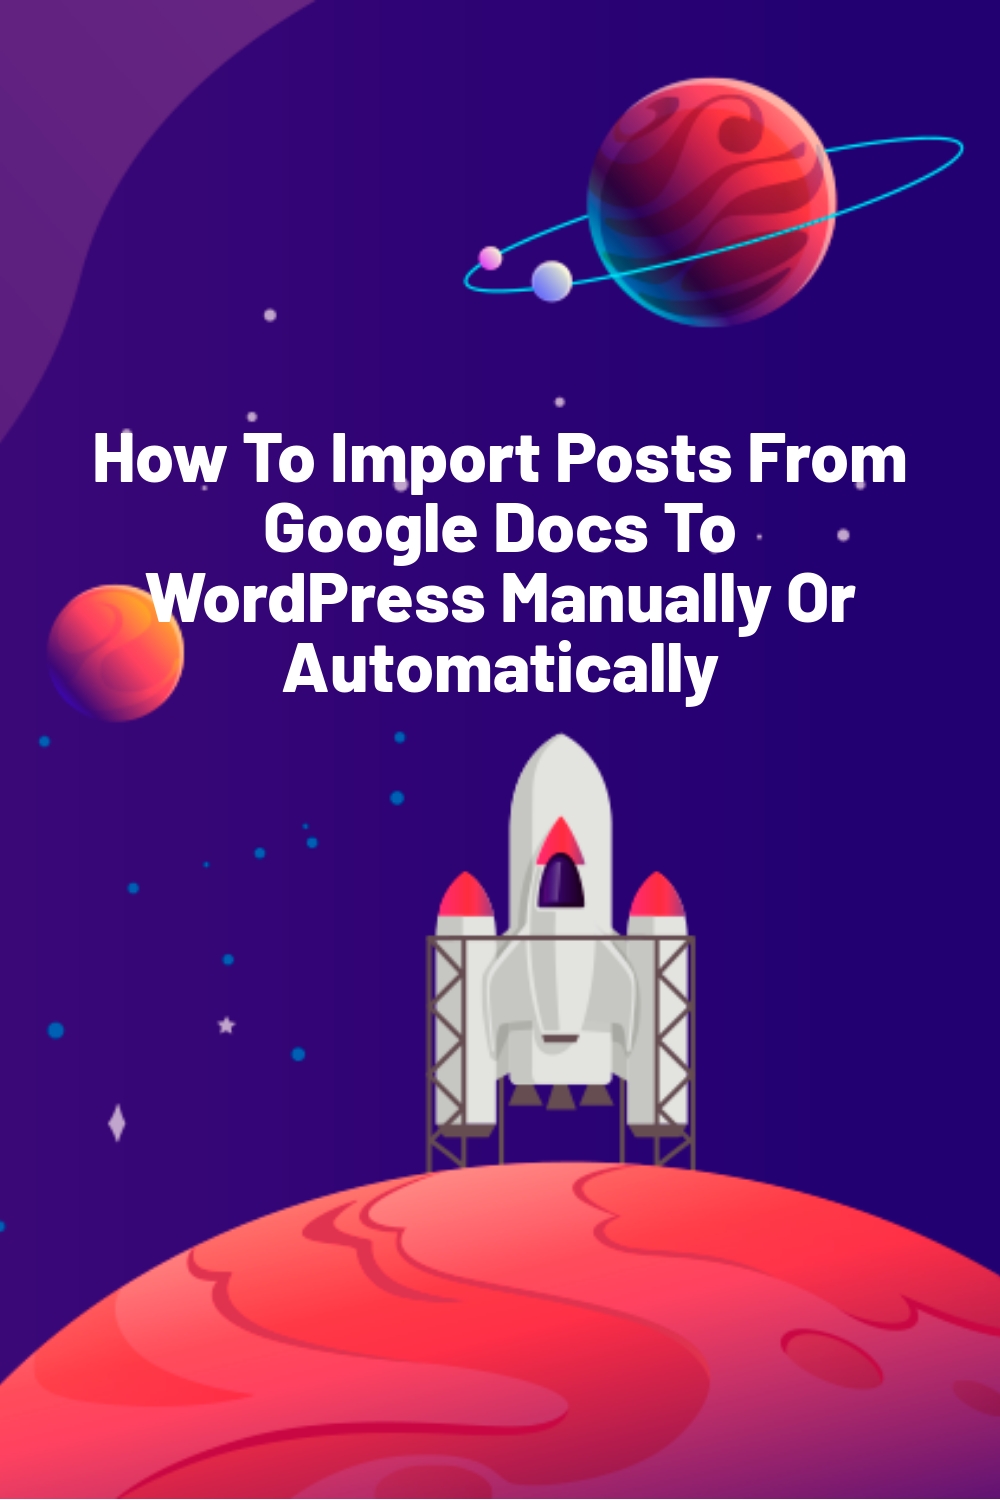 How To Import Posts From Google Docs To WordPress Manually Or Automatically